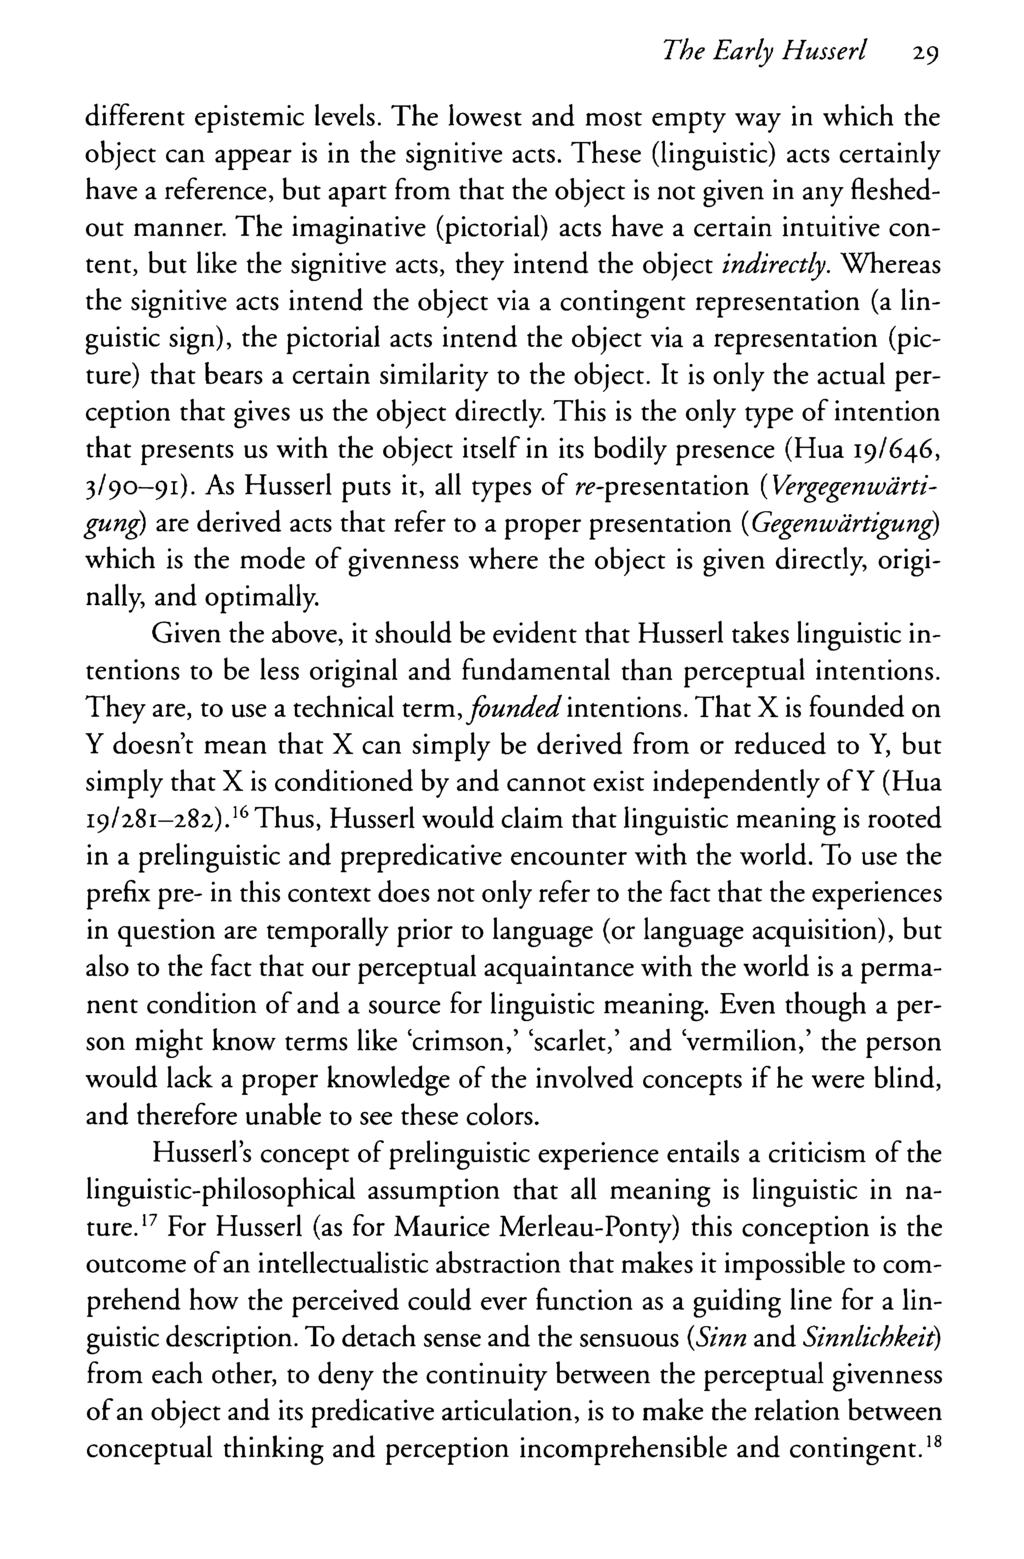 The Early Husserl 29 different epistemic levels. The lowest and most empty way in which the object can appear is in the signitive acts.